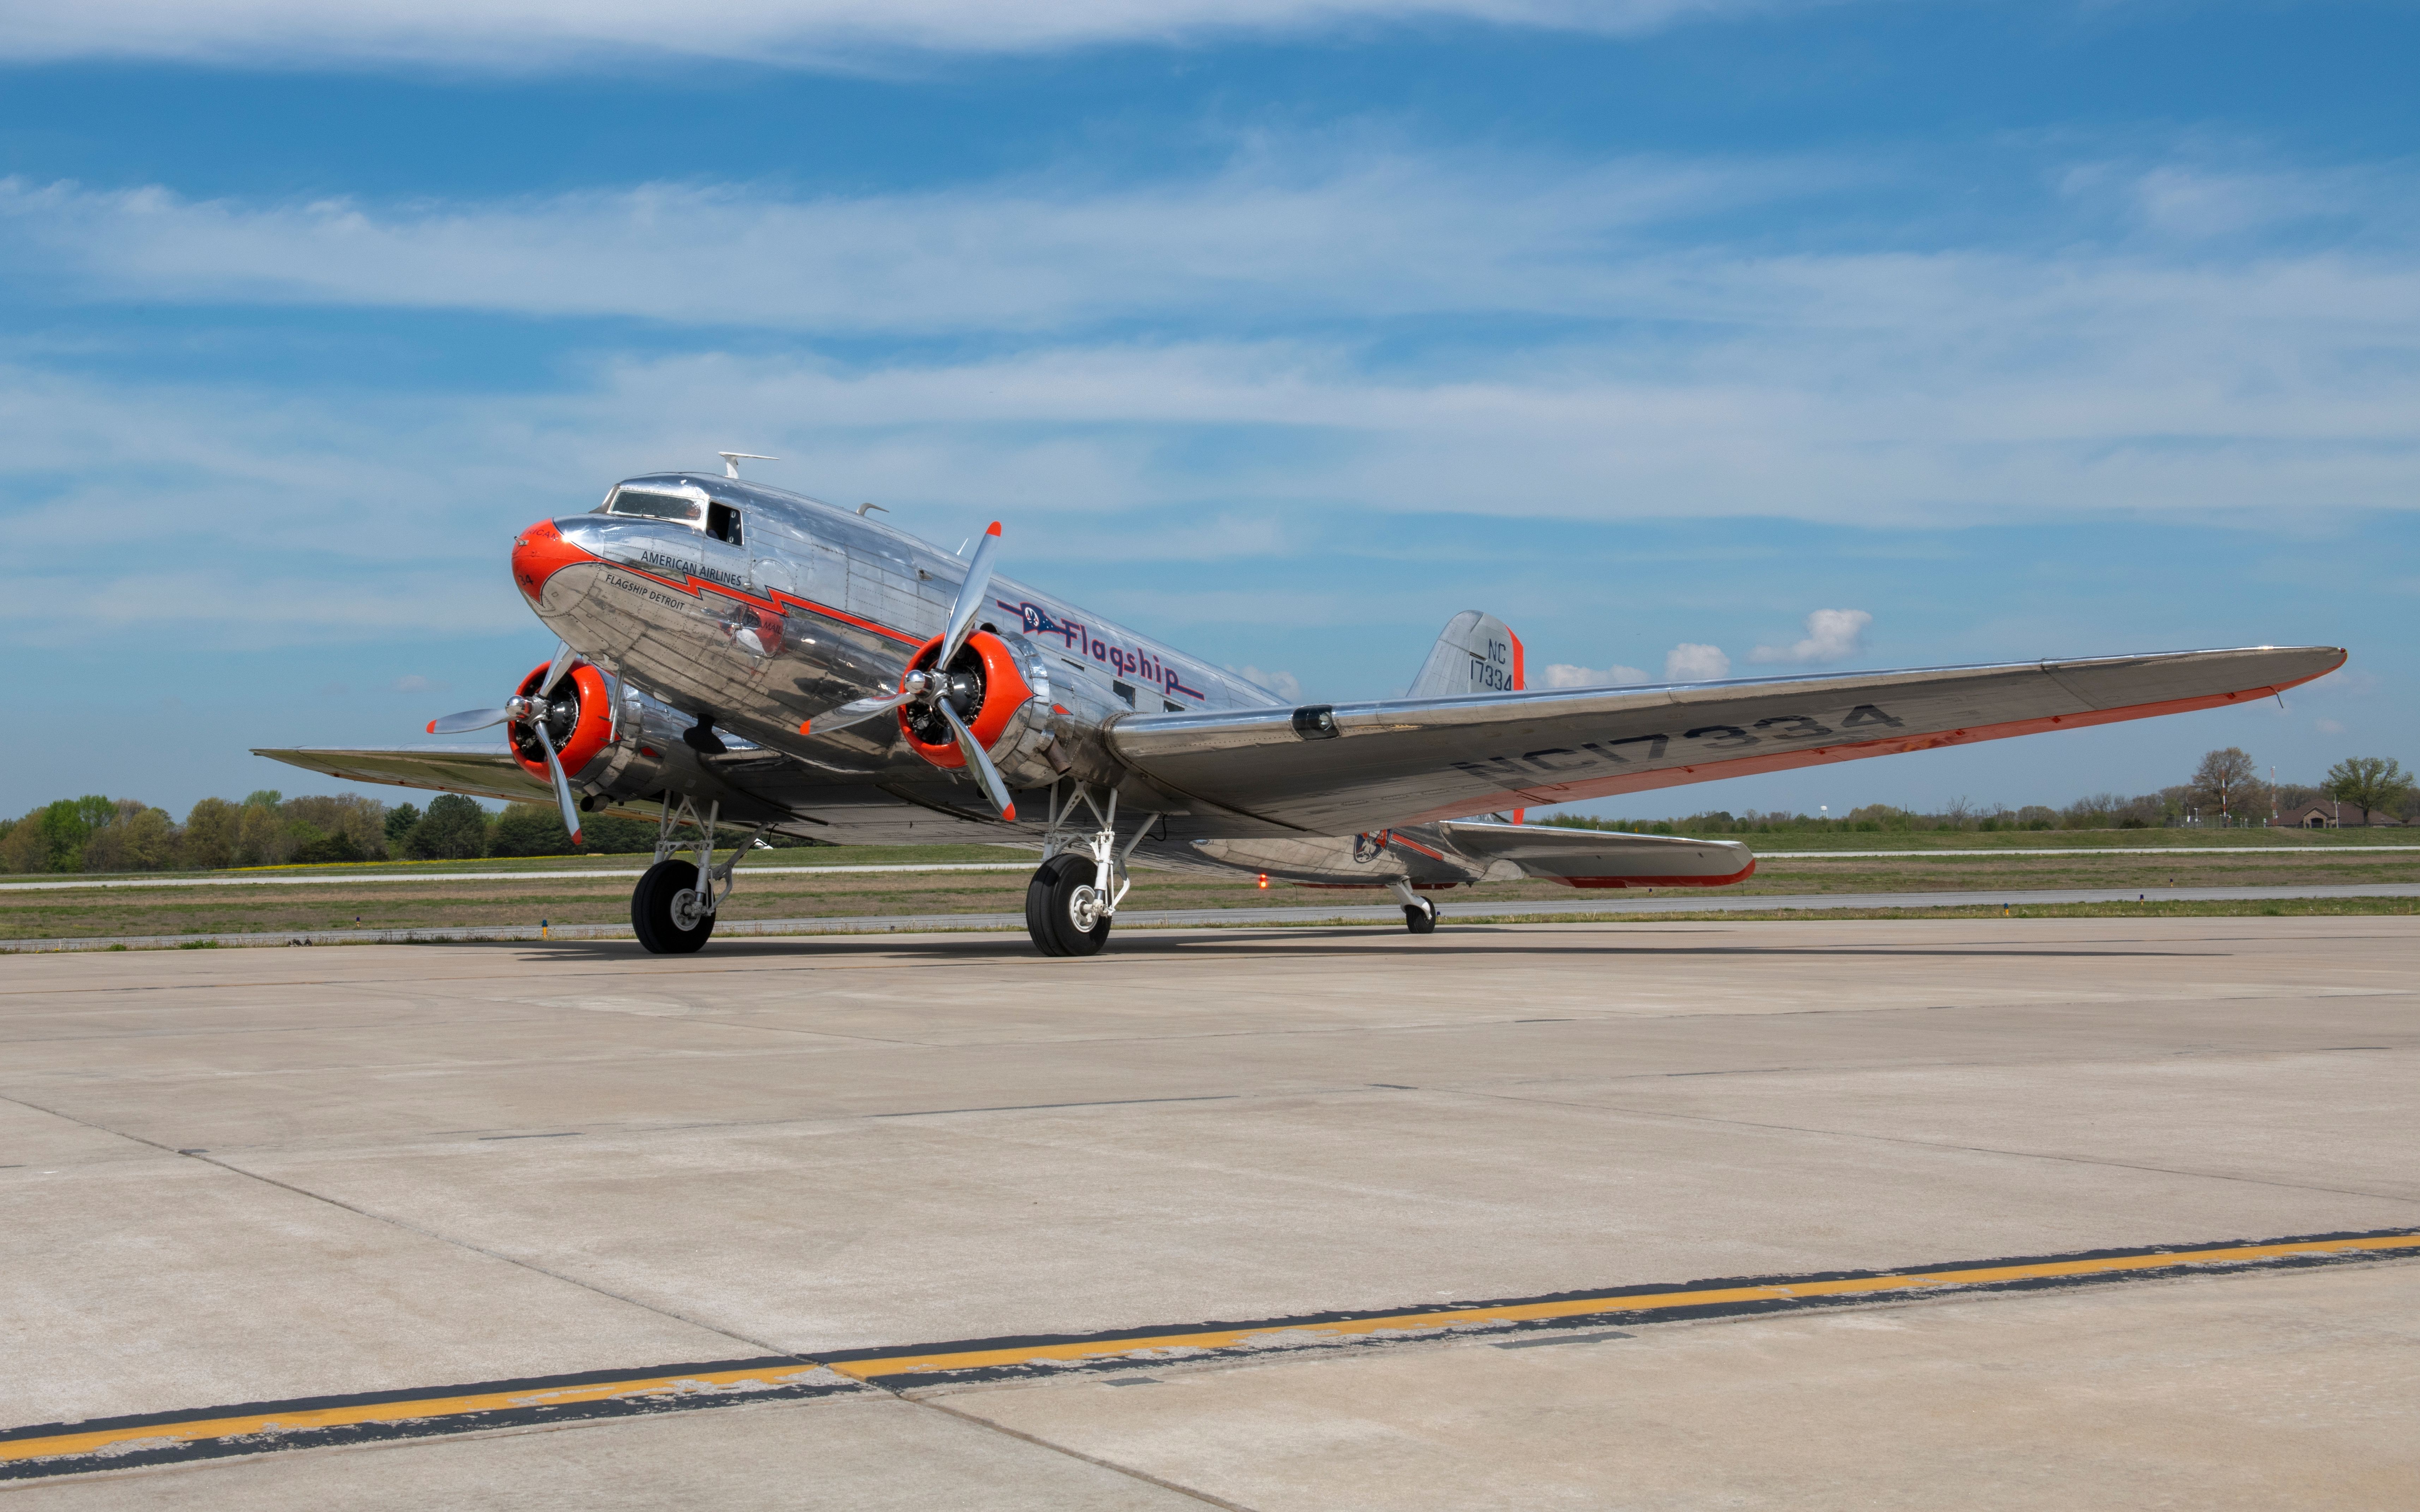 A Douglas DC-3 parked at an airfield.